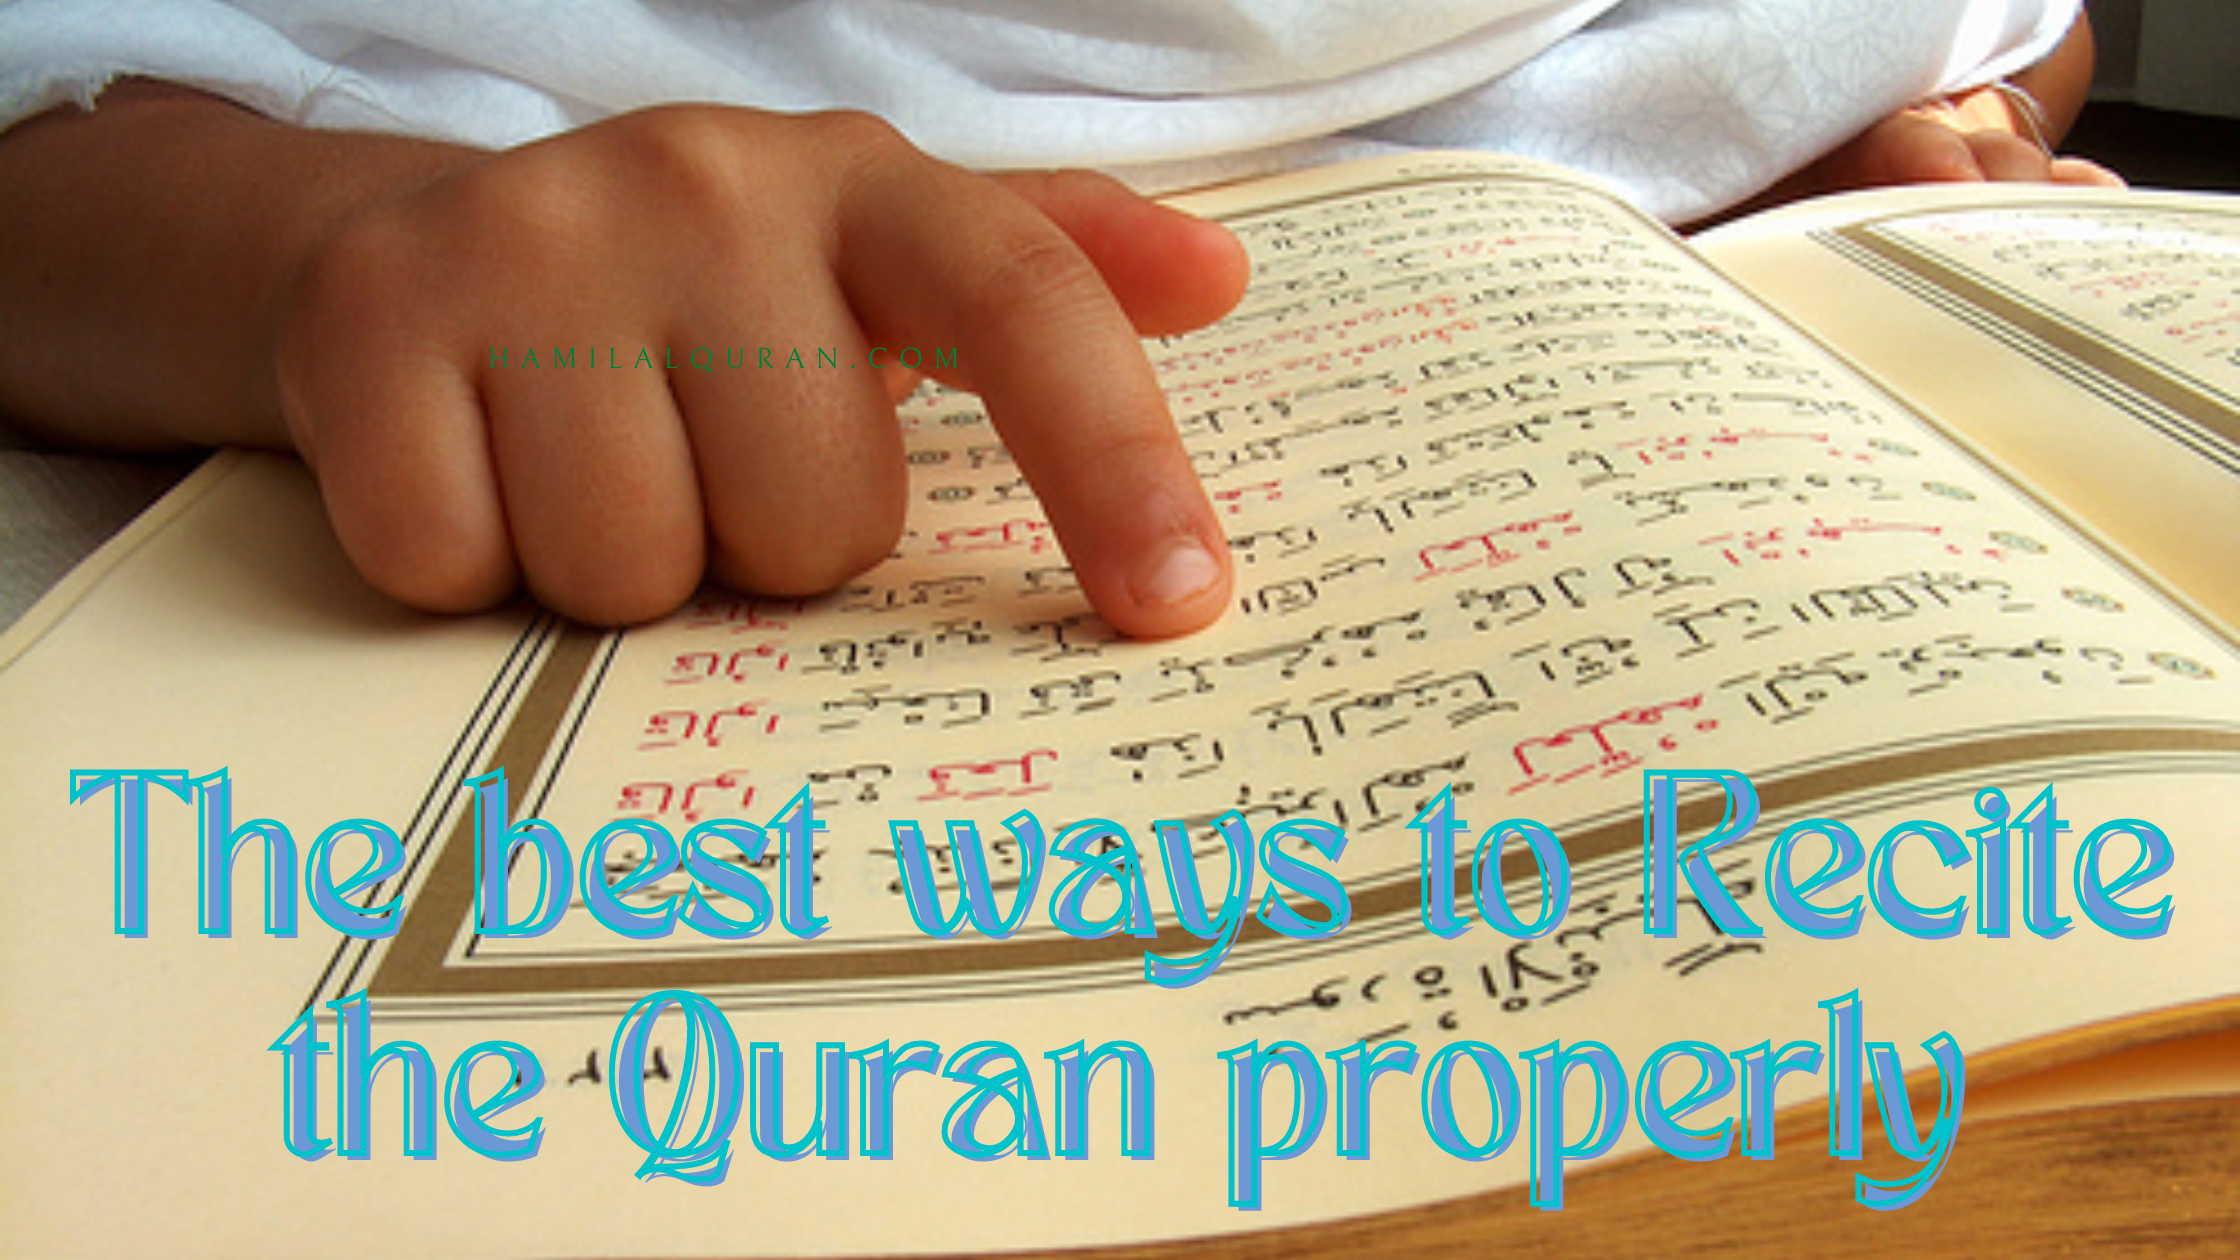 The best ways to Recite the Quran properly